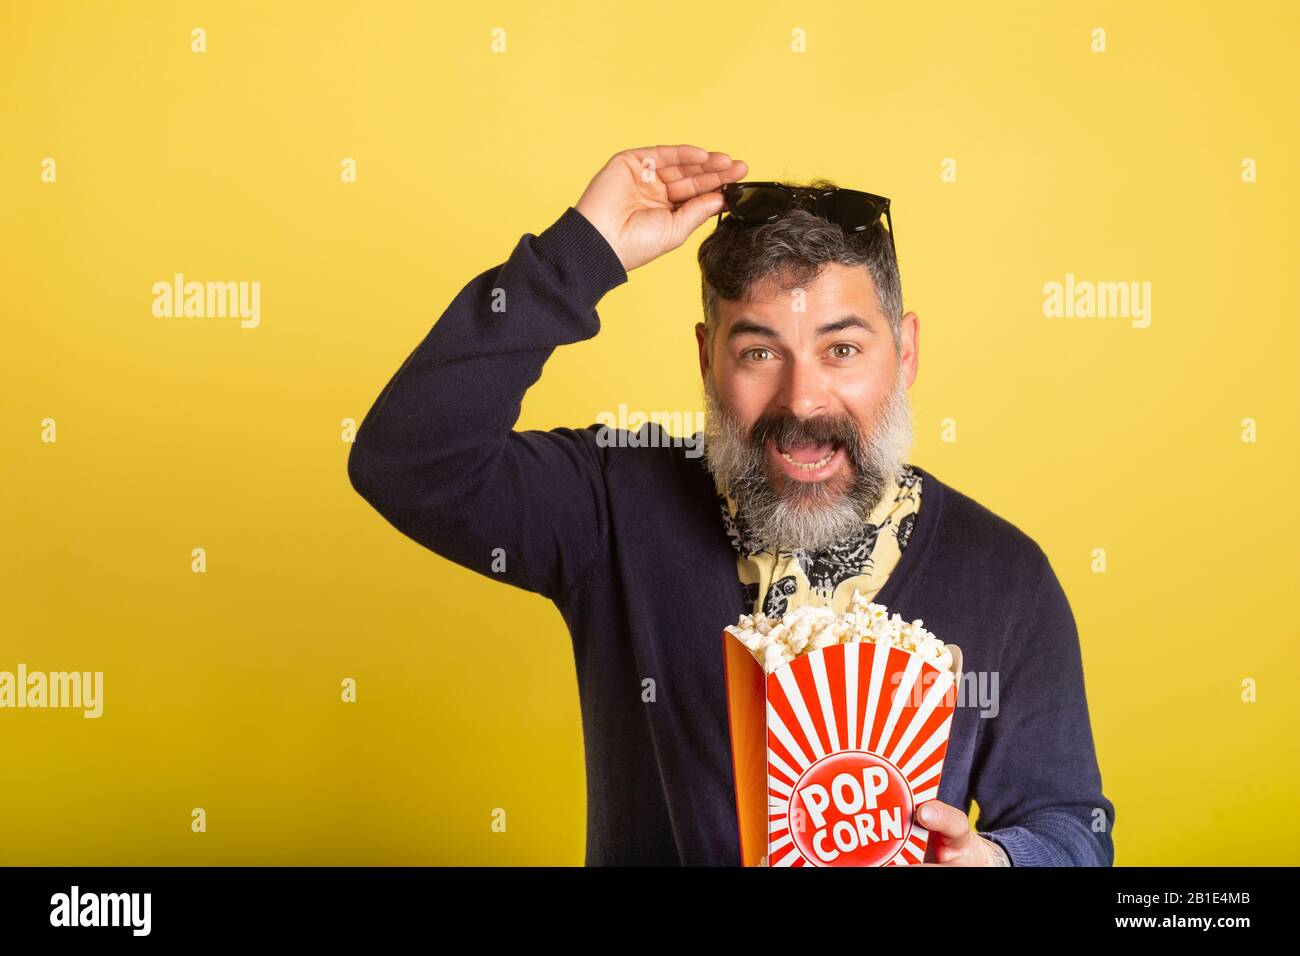 Man with white beard deeply entertained by raising sunglasses eating popcorn on yellow background. Stock Photo